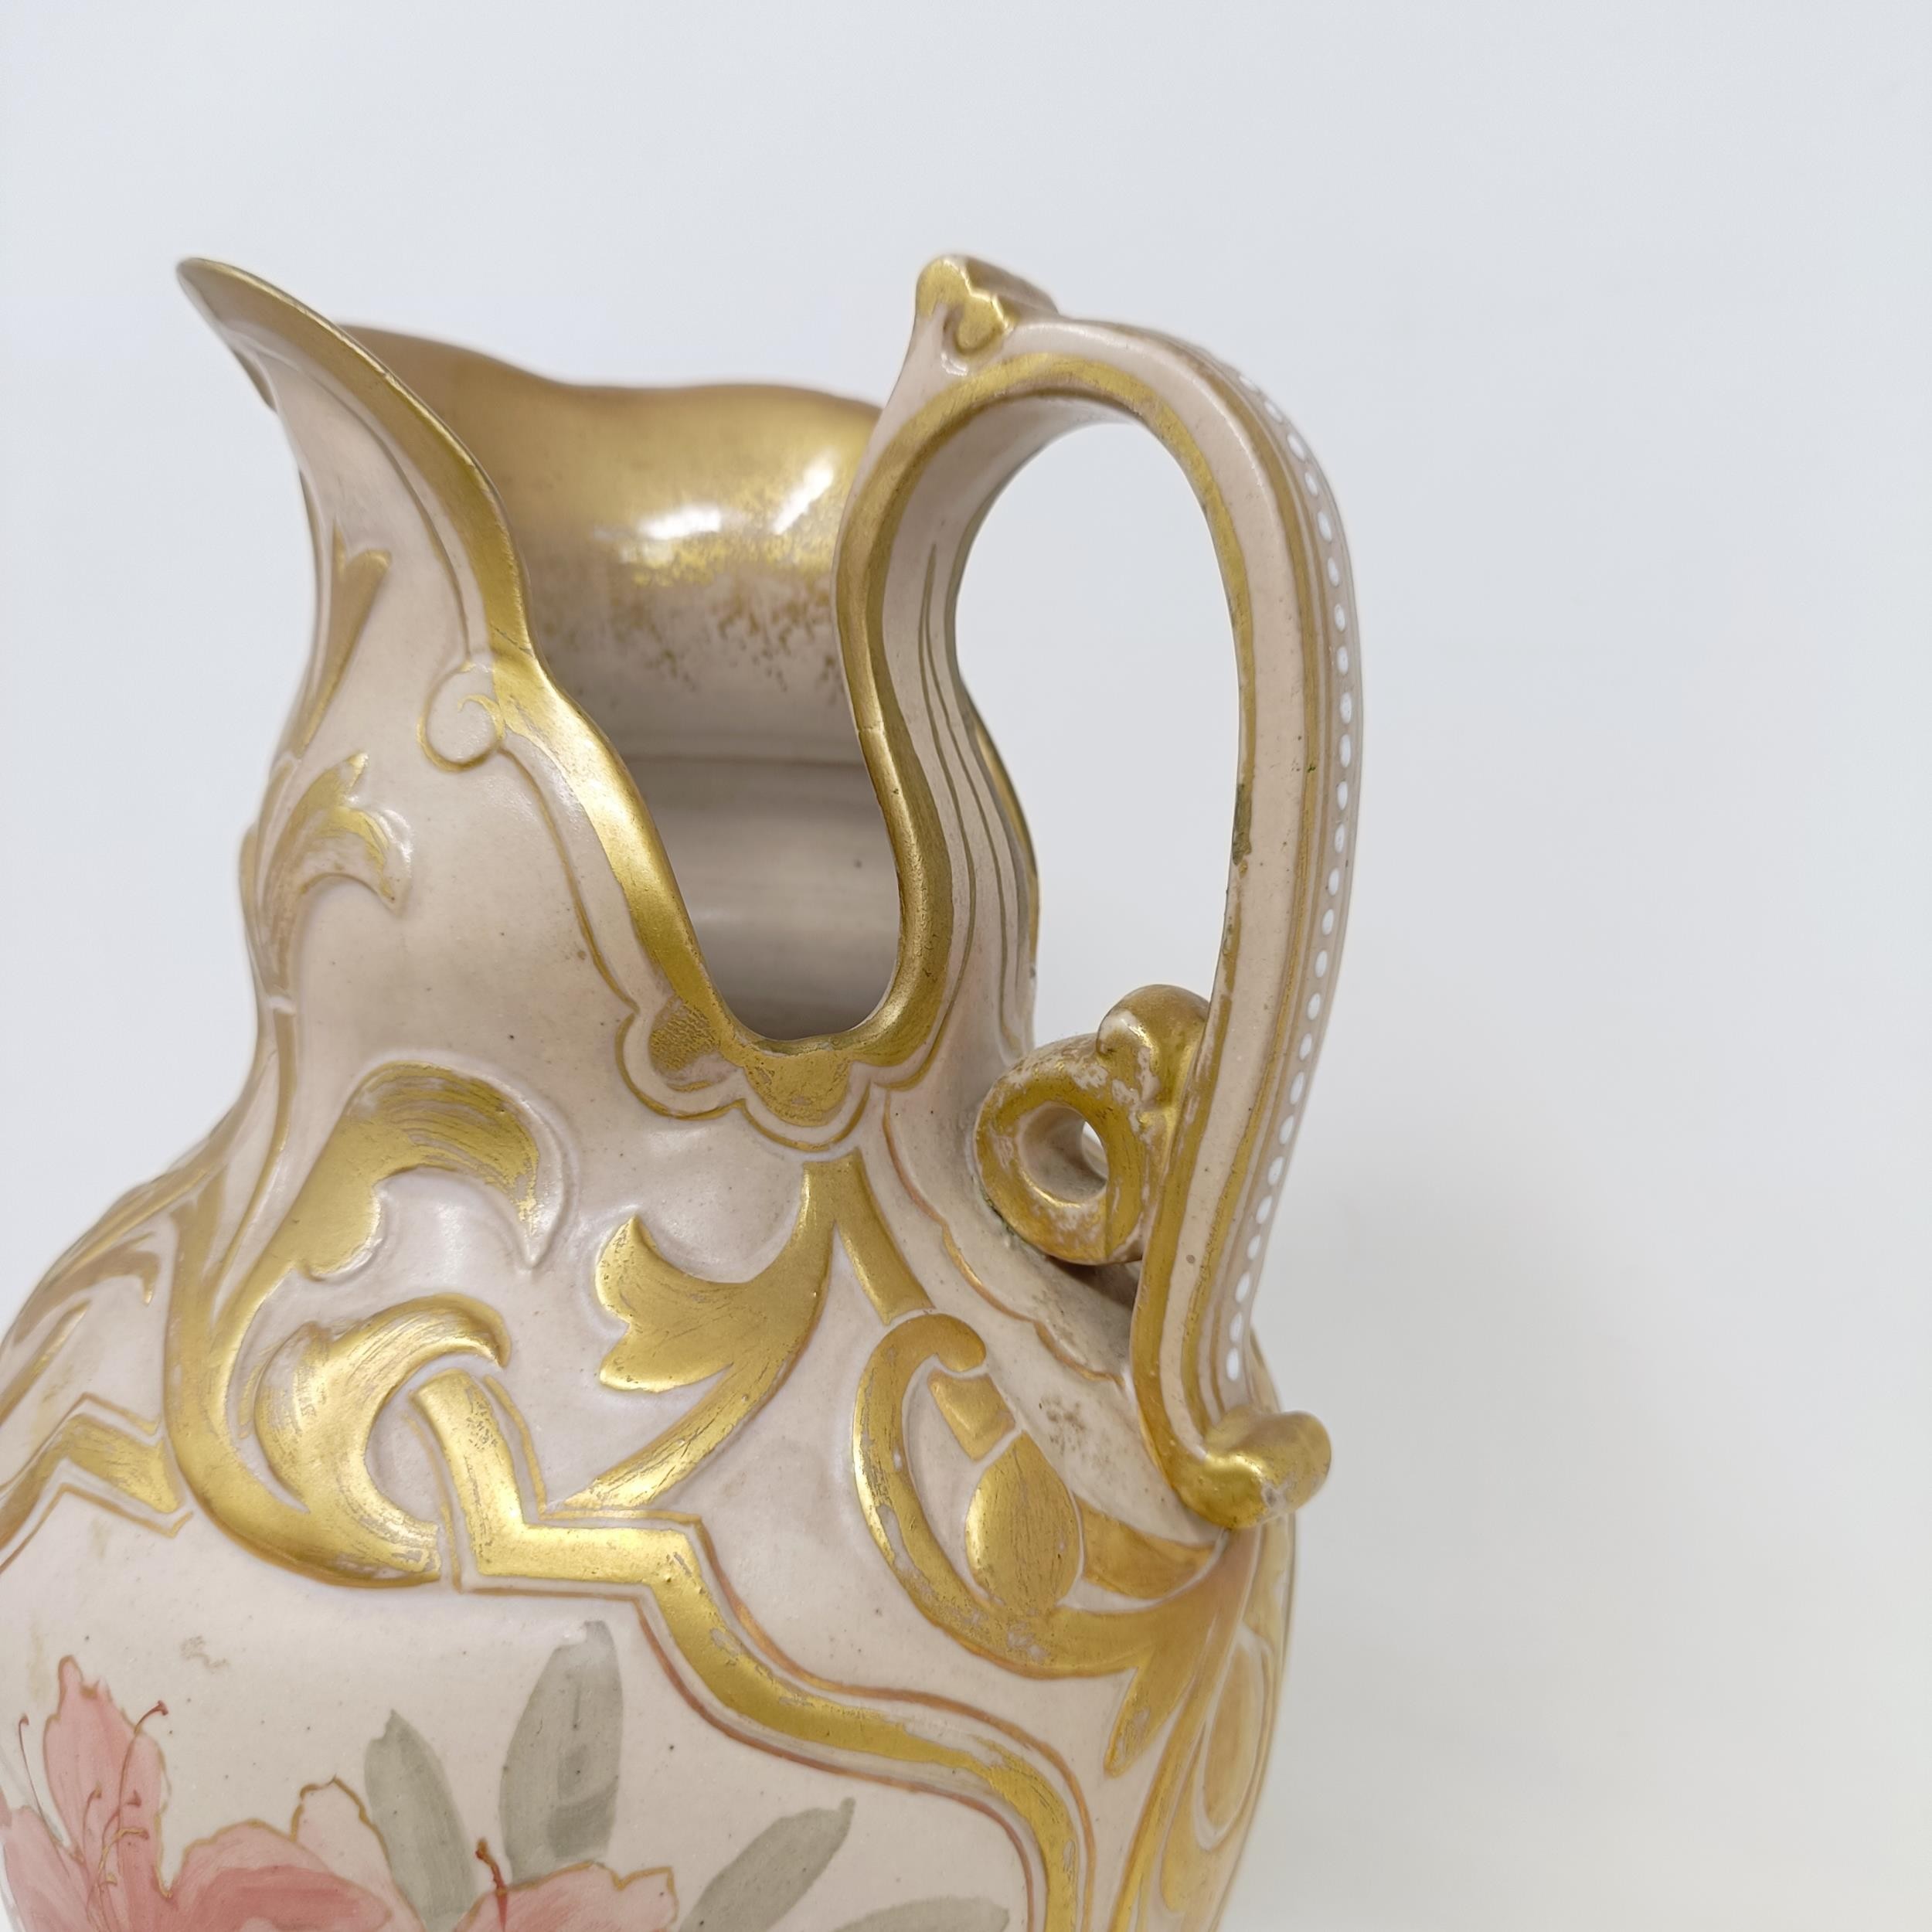 A Doulton Lambeth ewer, by Frank A Butler, decorated with flowers, highlighted in gilt, 30 cm high - Image 3 of 7